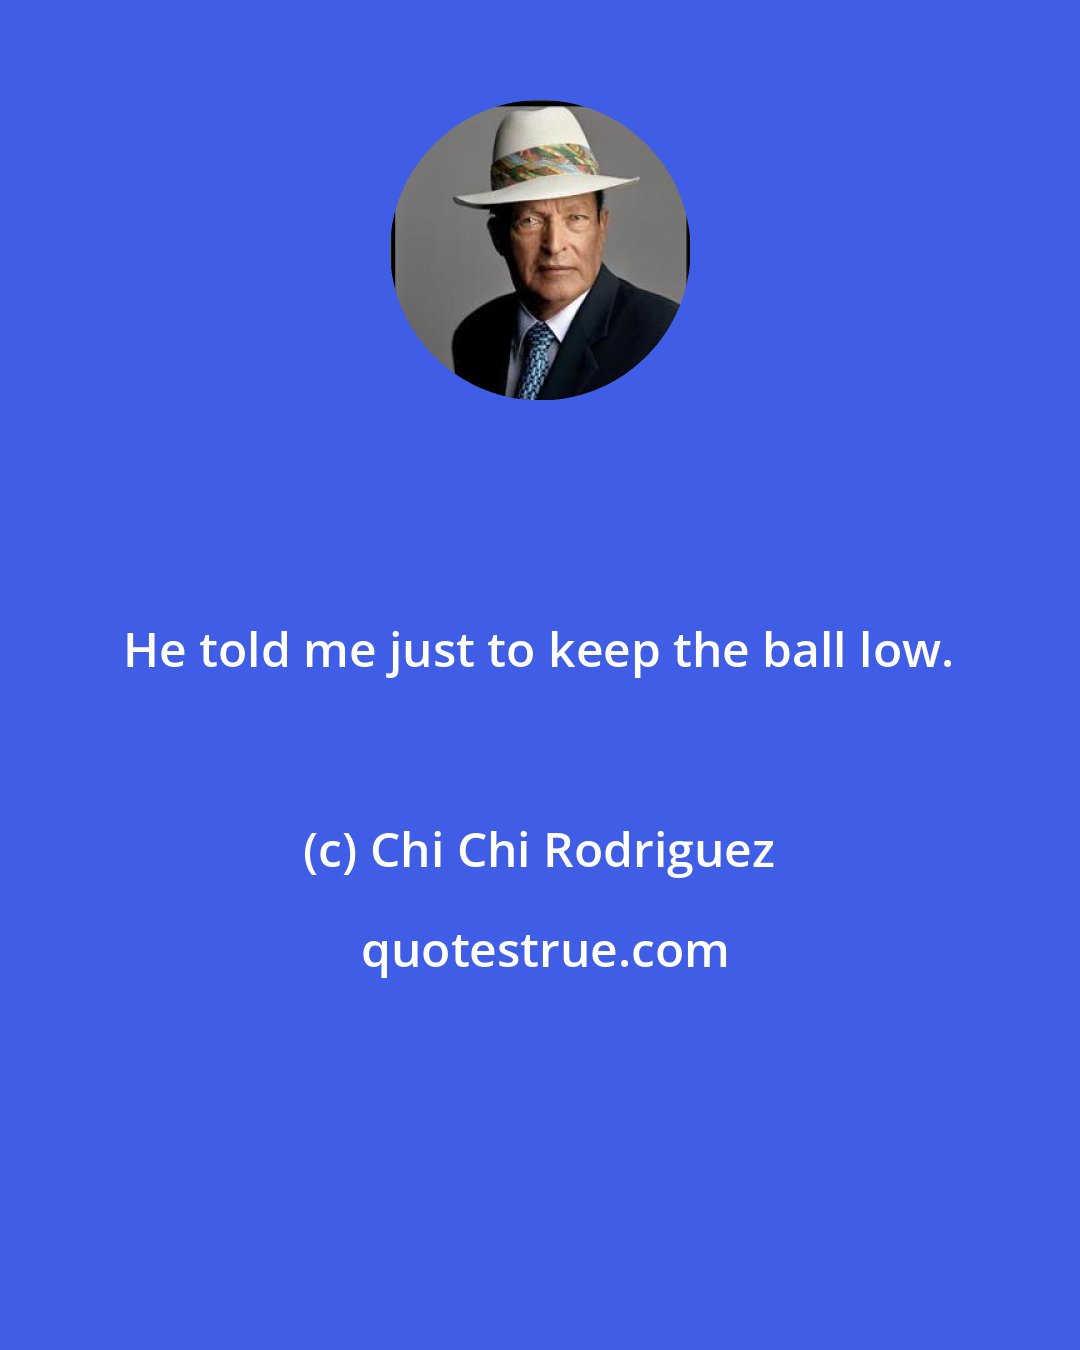 Chi Chi Rodriguez: He told me just to keep the ball low.